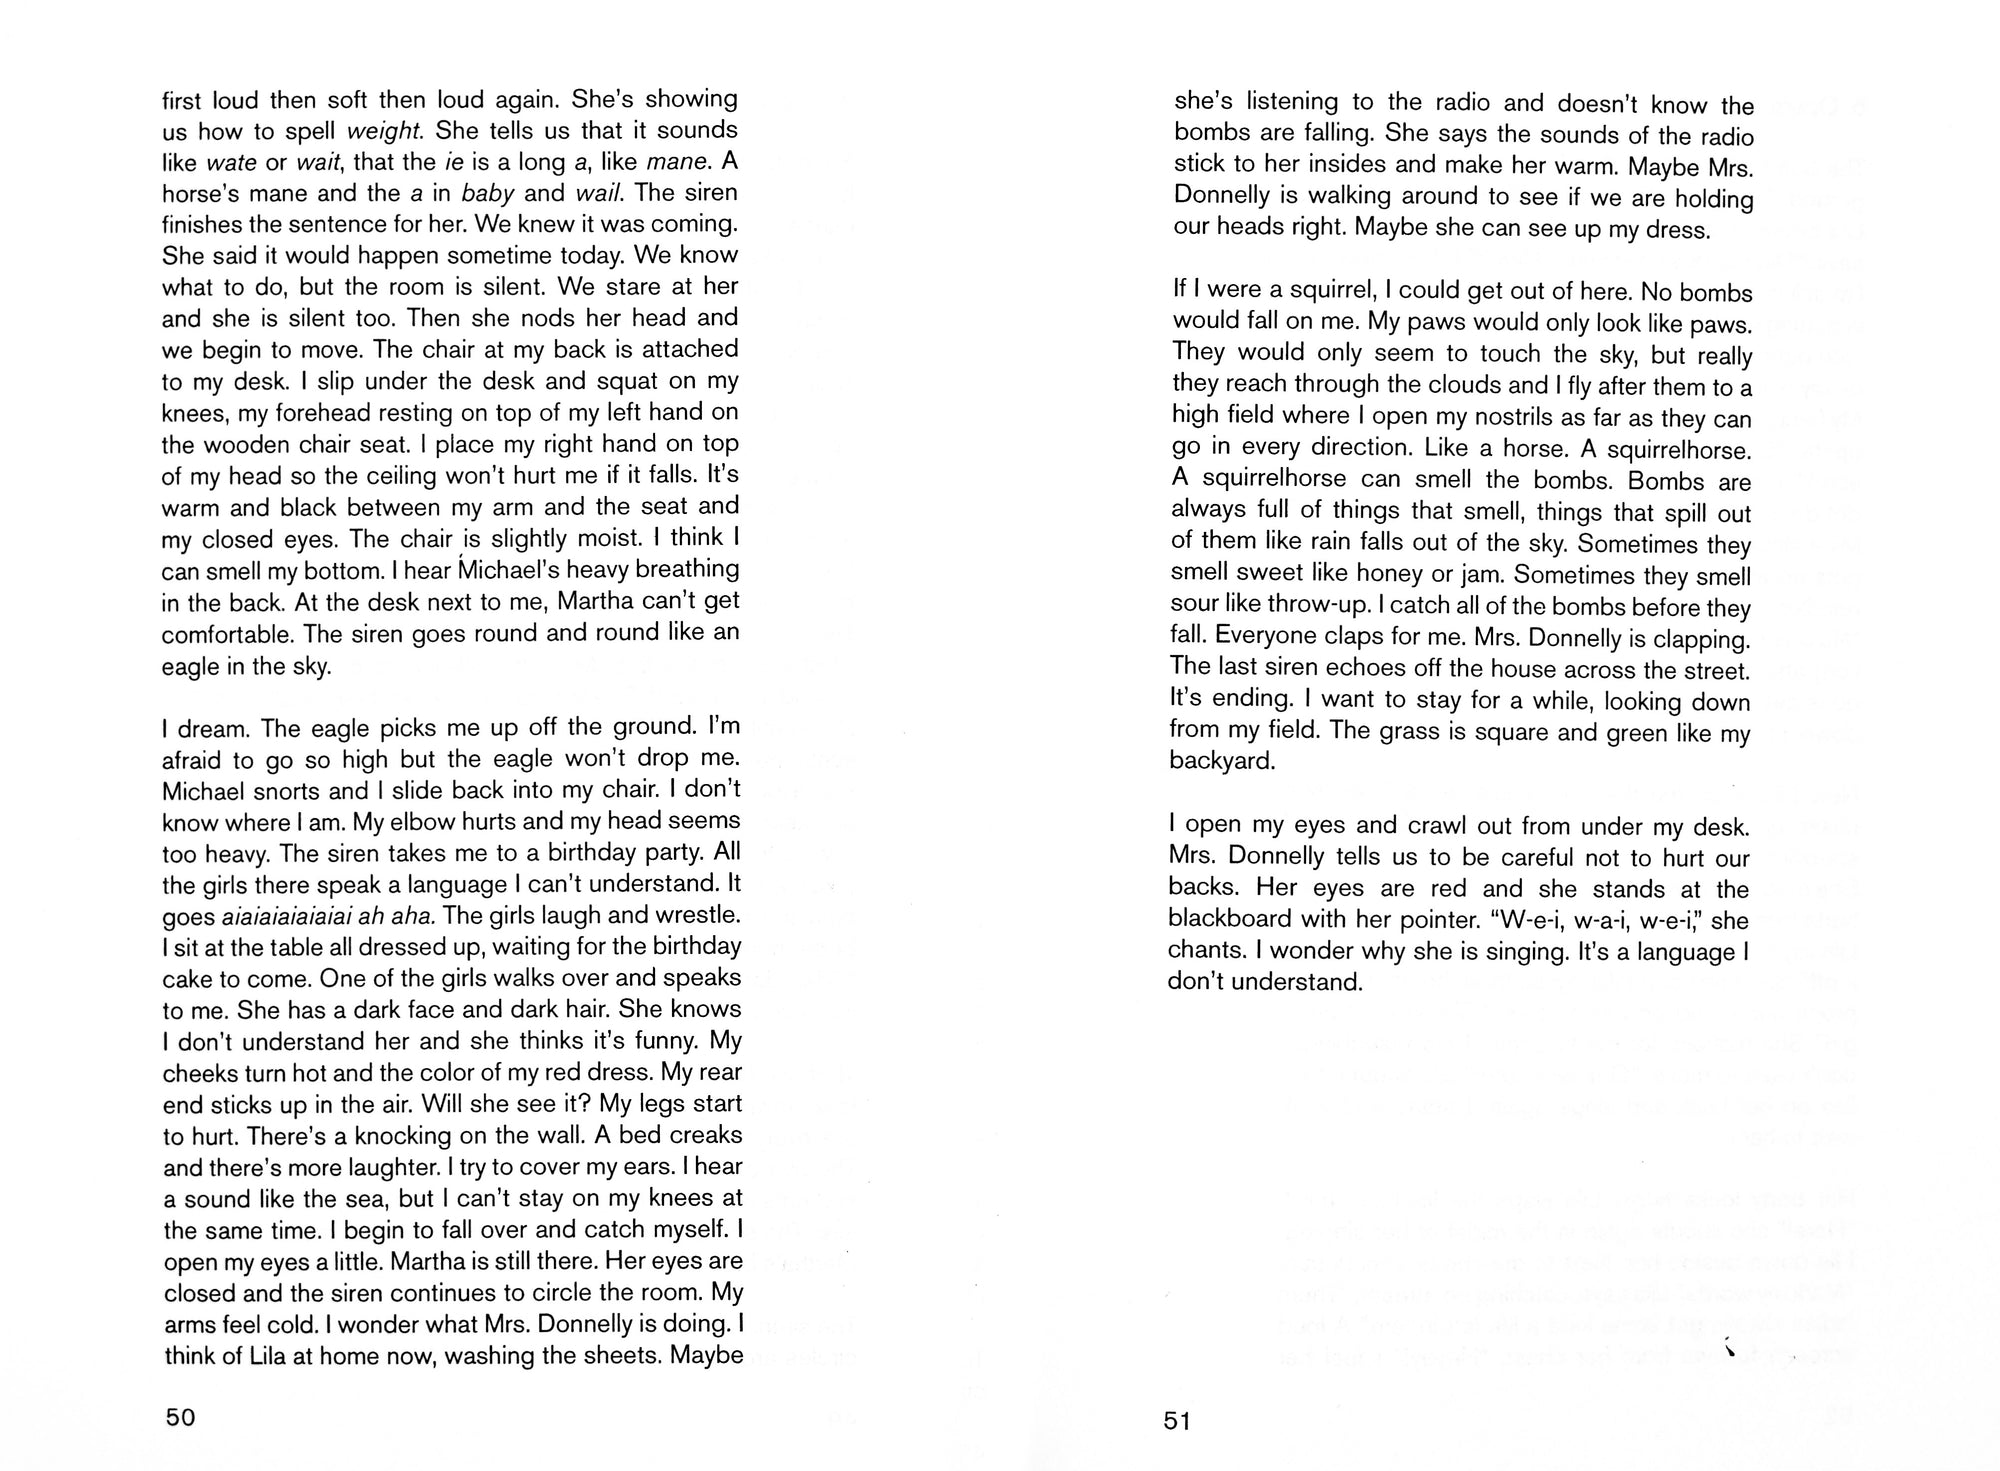 Book spread with white background and one column of text in black sans serif on each page.